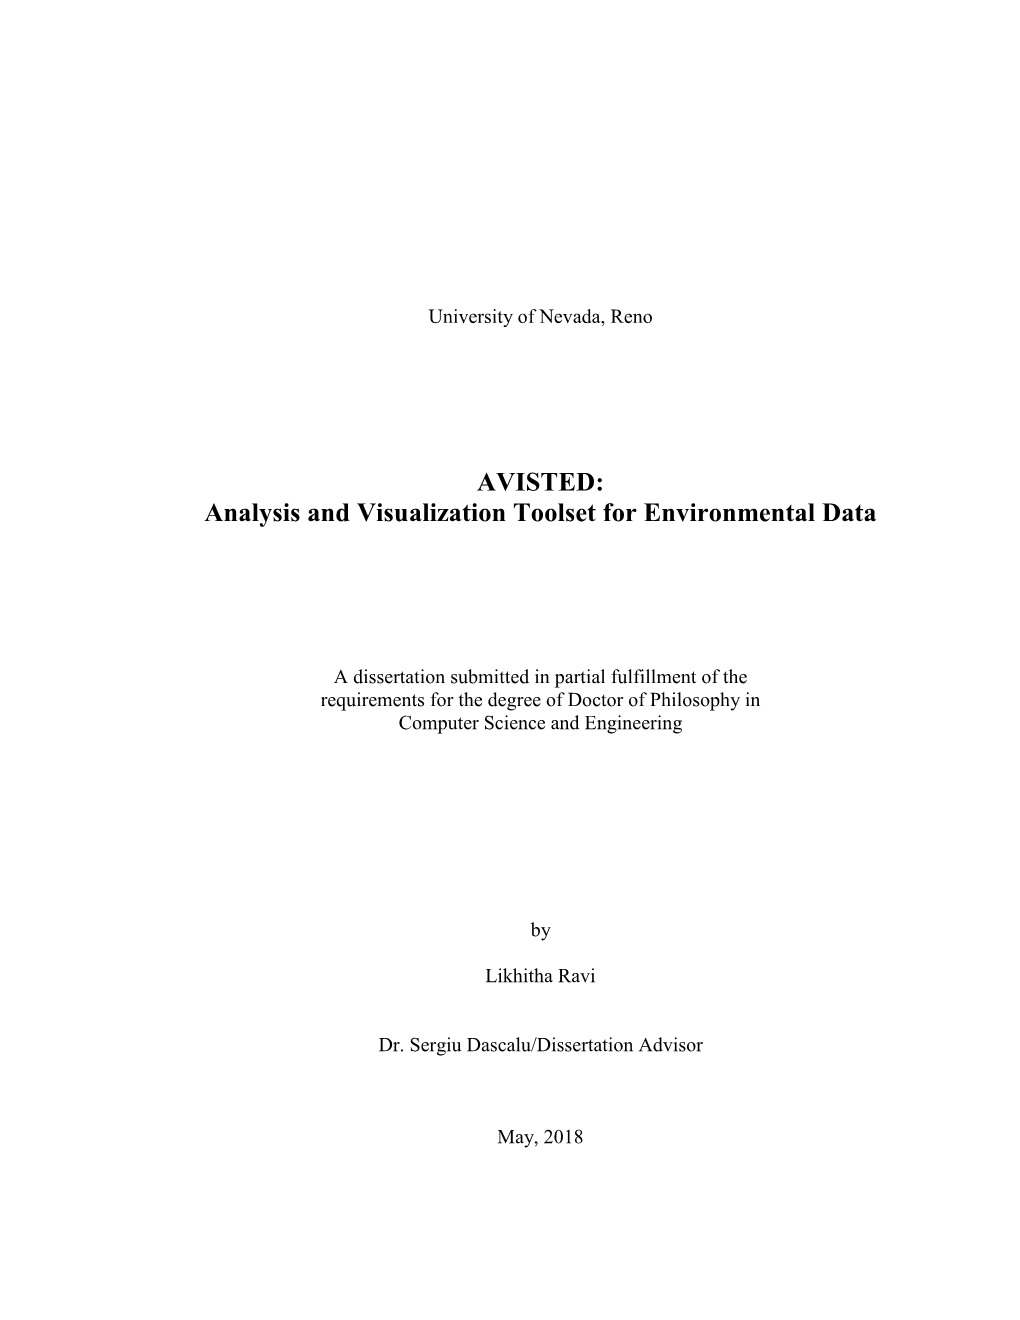 Analysis and Visualization Toolset for Environmental Data